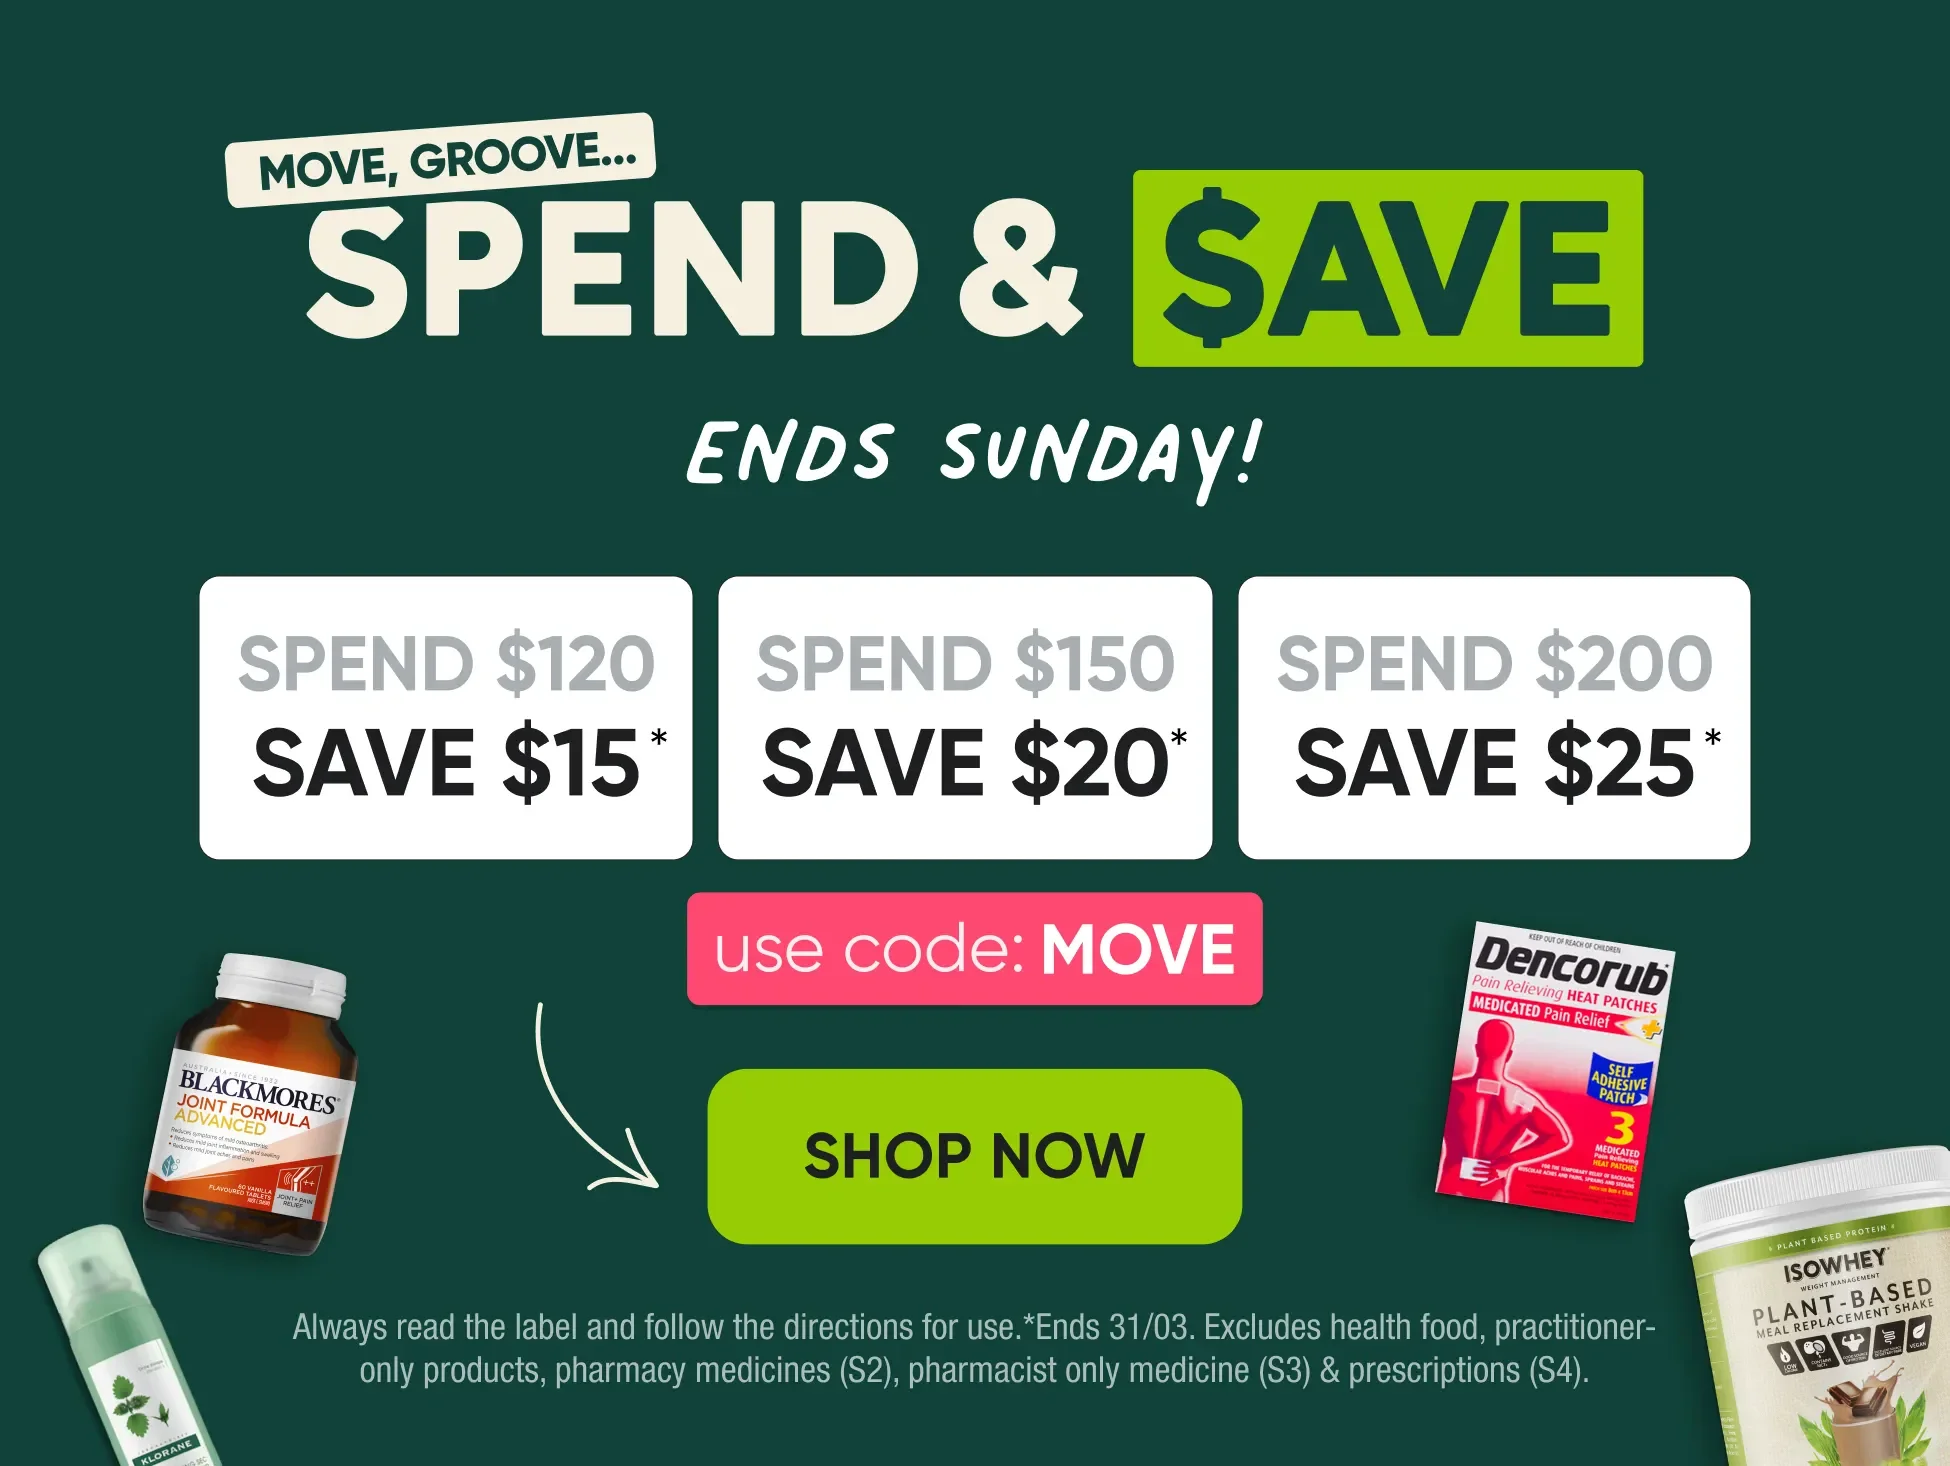 Spend and Save! It's time to move, groove and save! Spend  $120+ and use code MOVE at checkout.